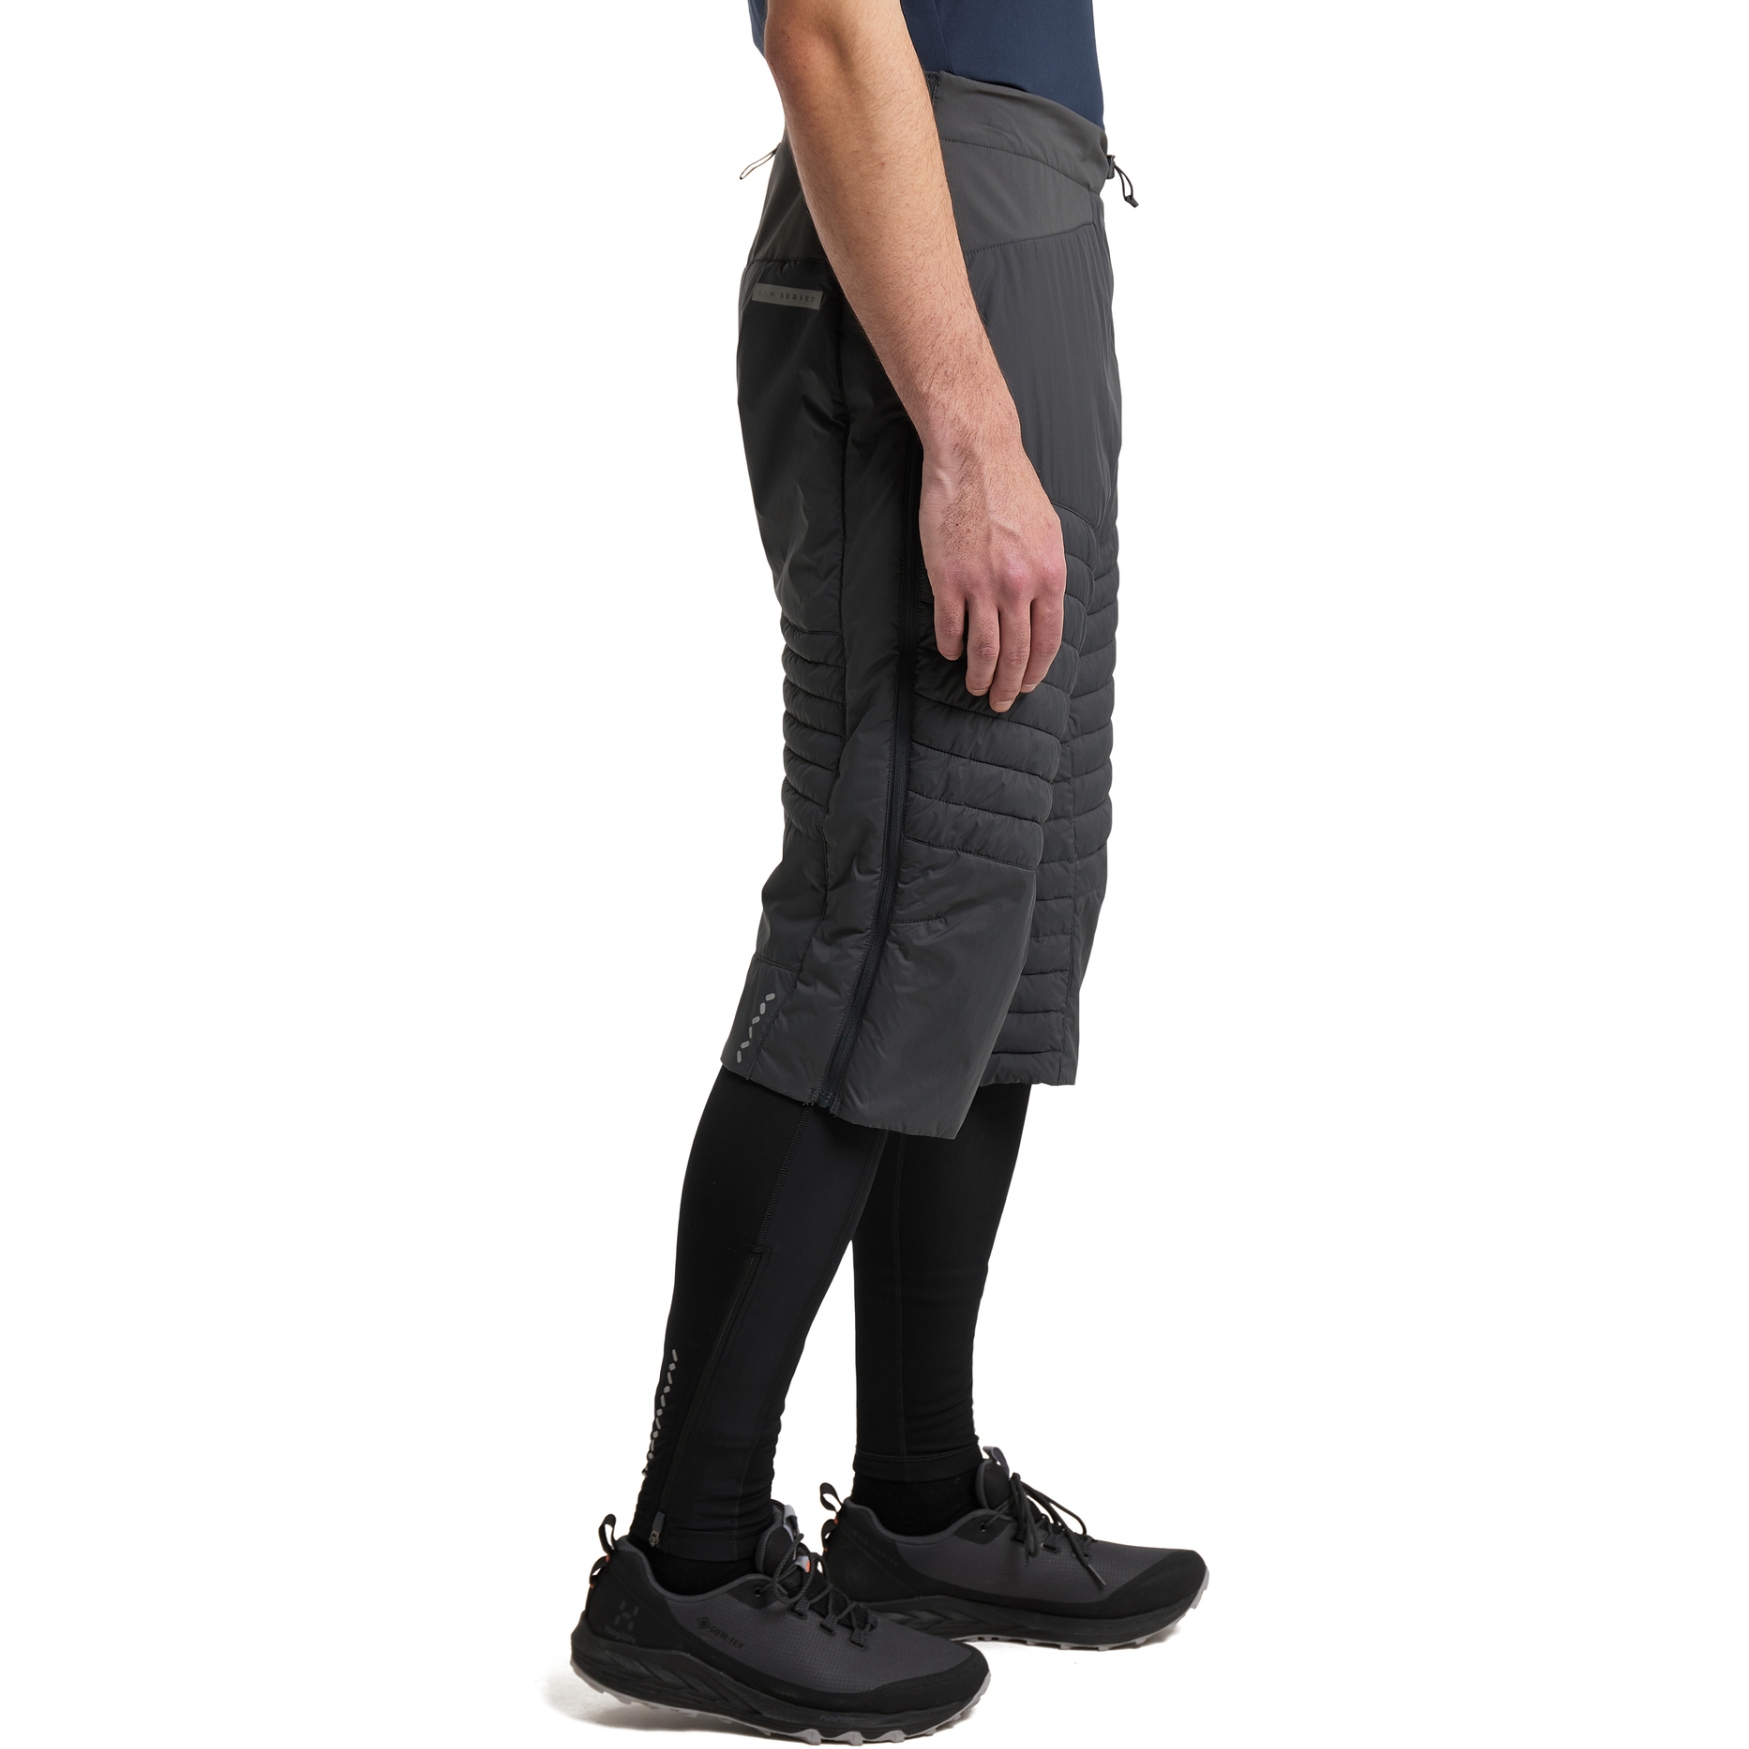 UNIQLO Malaysia - MEN Roll Up 3/4 Cargo Pants Retails at RM 79.90 (U.P. RM  129.90) Get it at: http://s.uniqlo.com/2gDBzoB Limited offer from 16-22 Dec  | Facebook